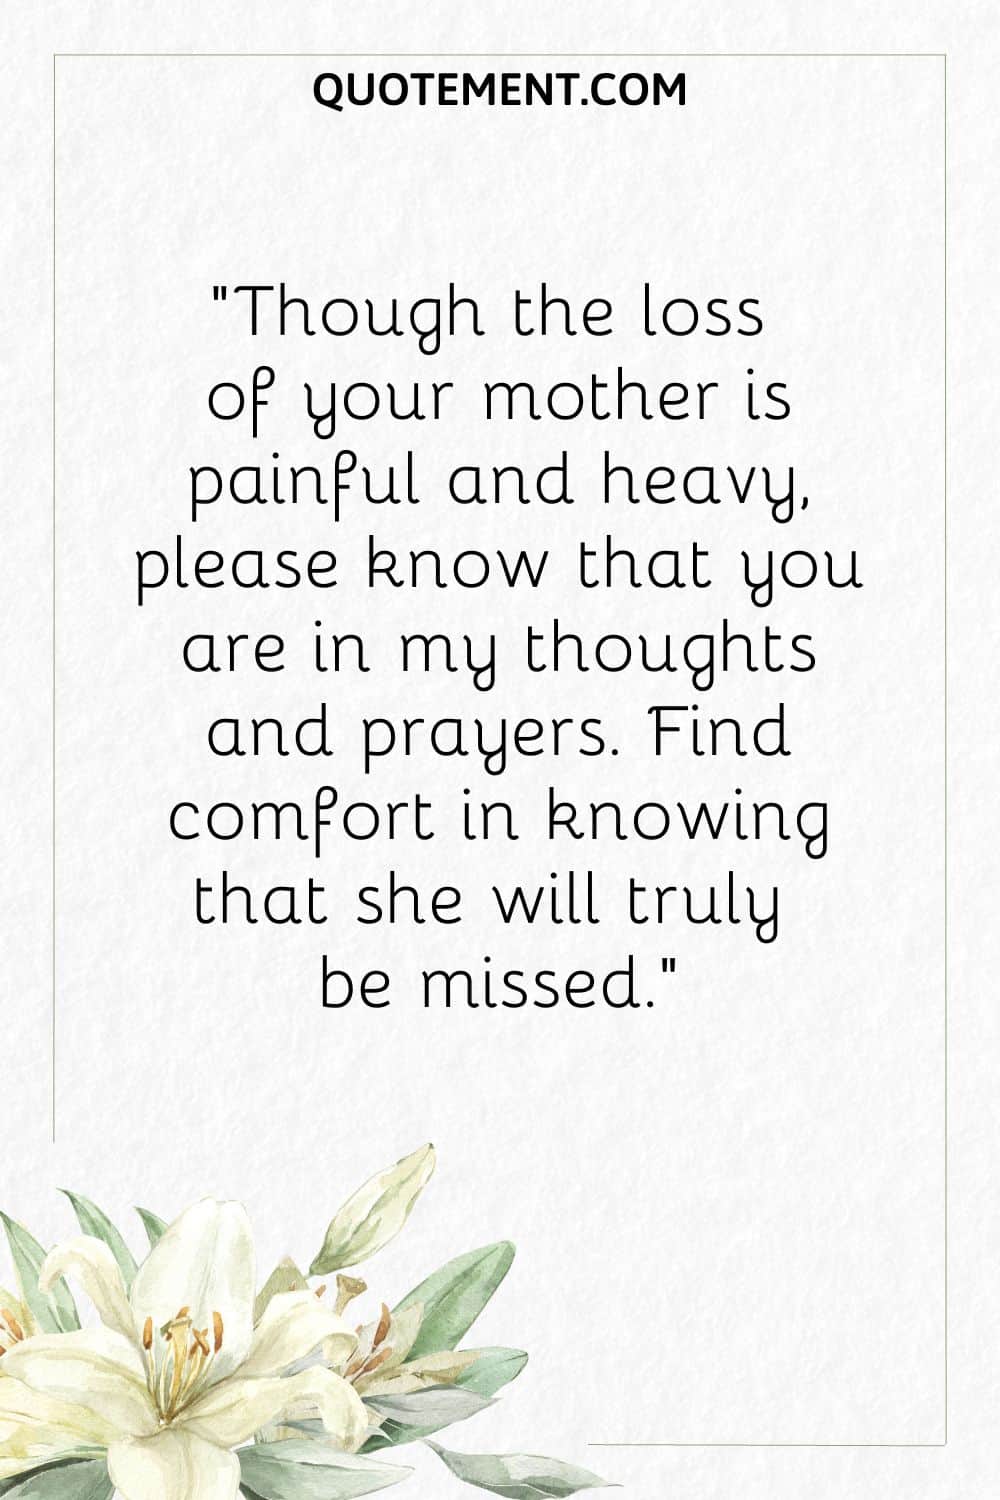 Though the loss of your mother is painful and heavy, please know that you are in my thoughts and prayers